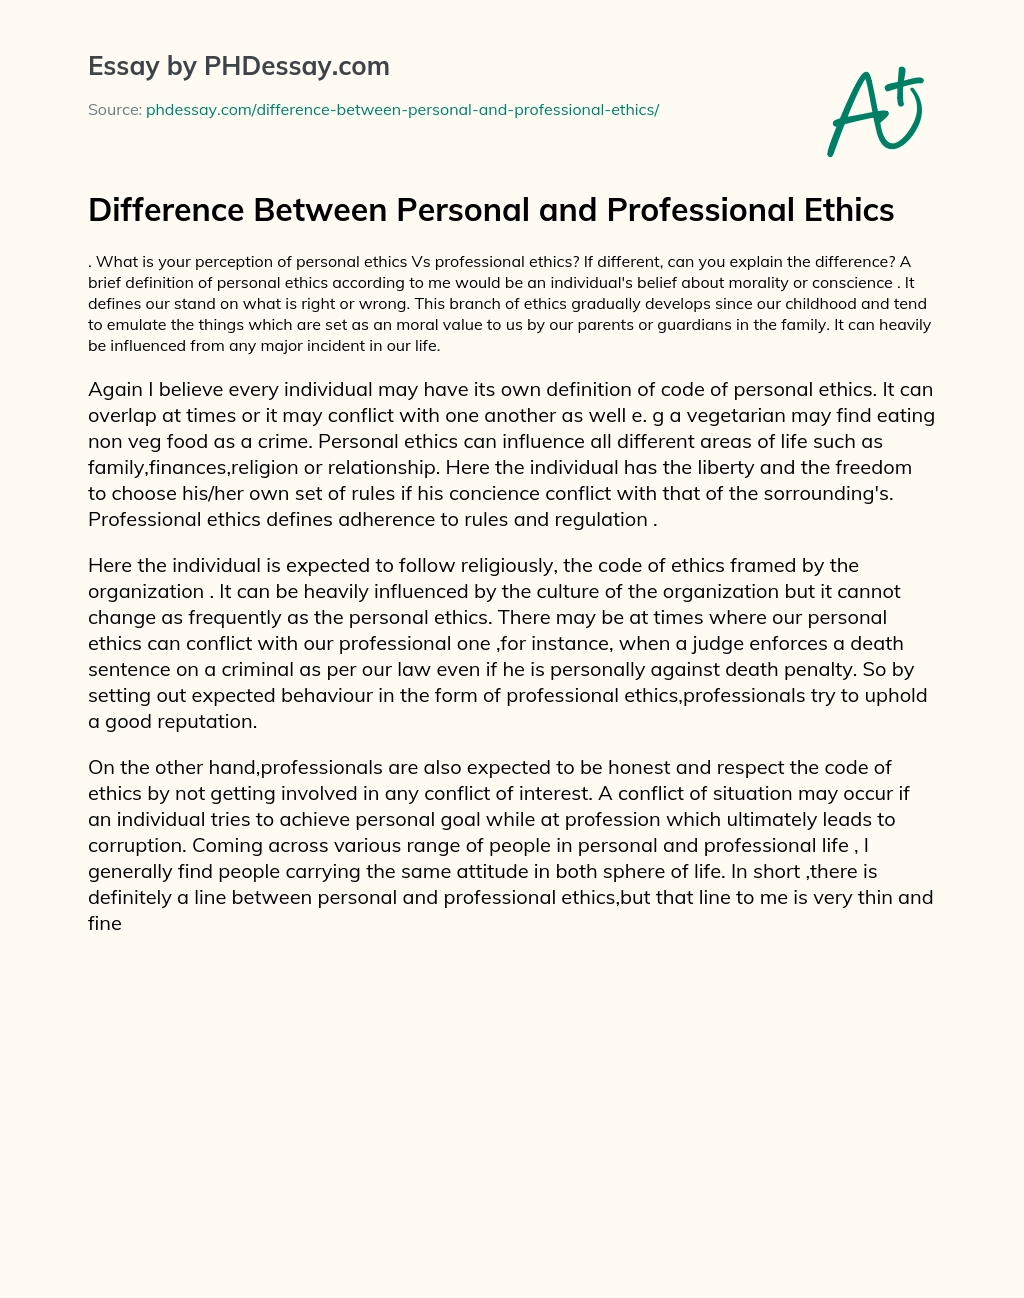 Difference Between Personal and Professional Ethics essay